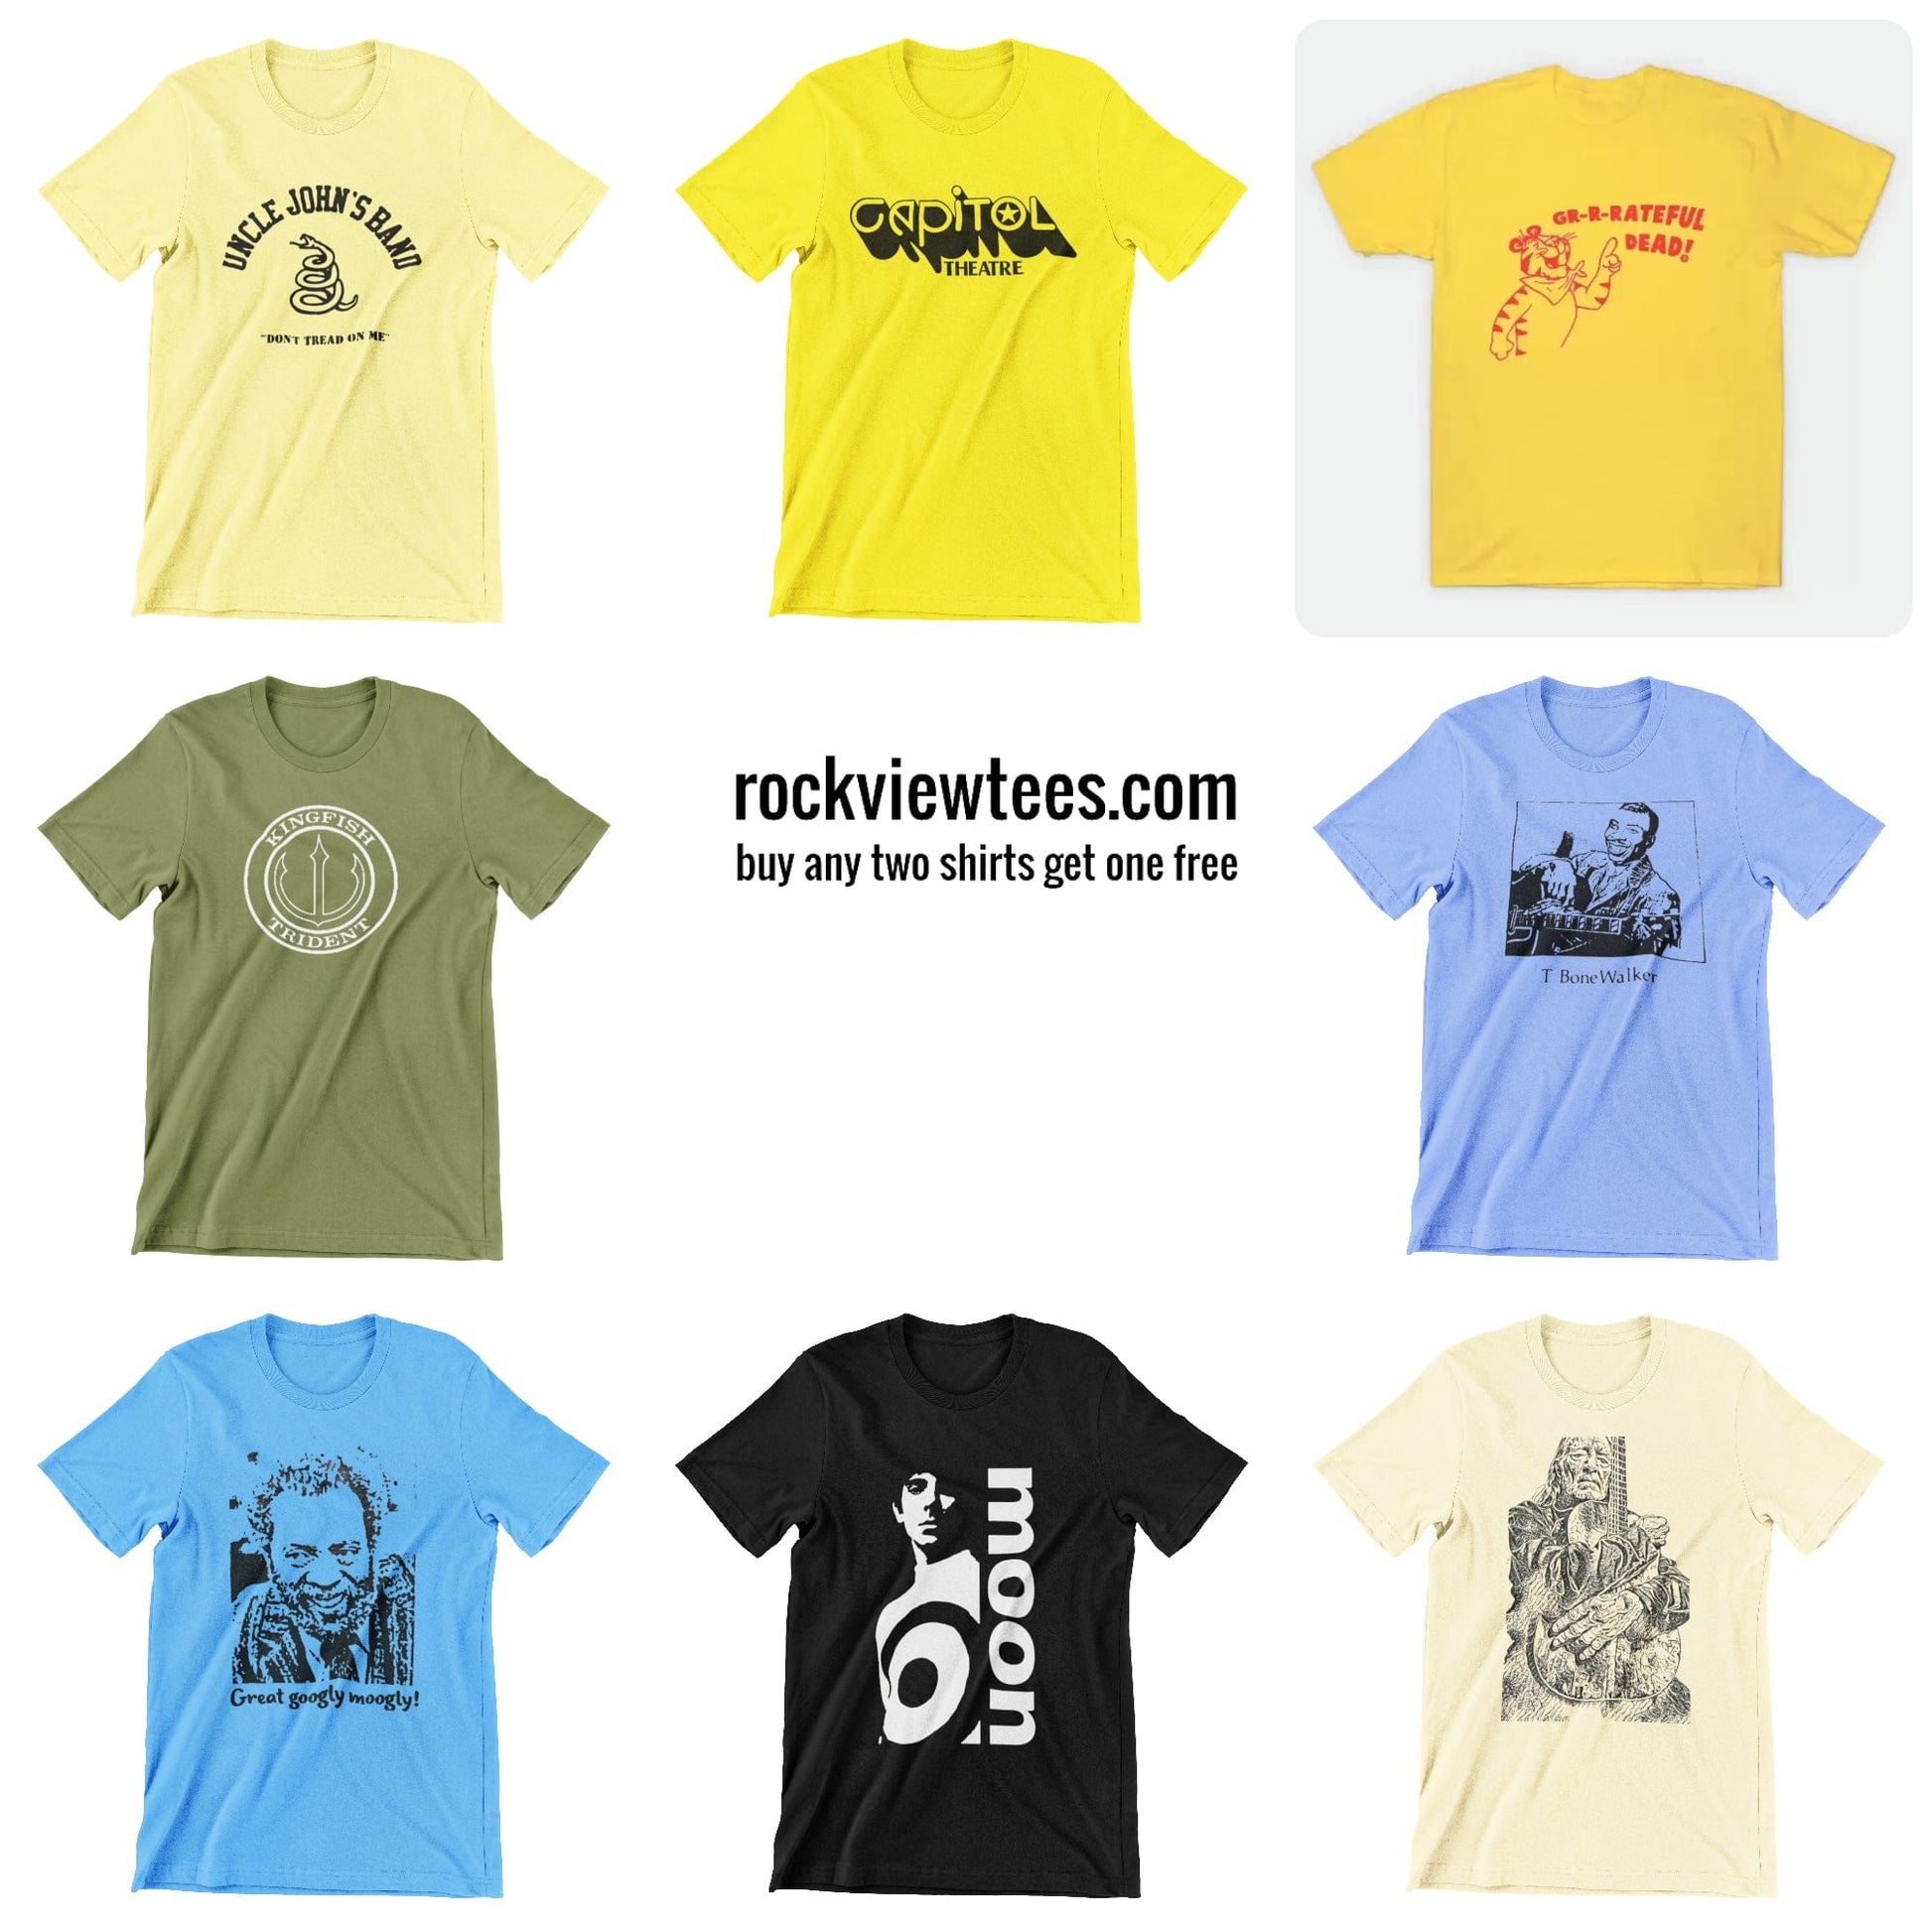 Hot Deal (Buy Any Two Shirts Get One Free! Free Shipping) t shirts rockviewtees.com